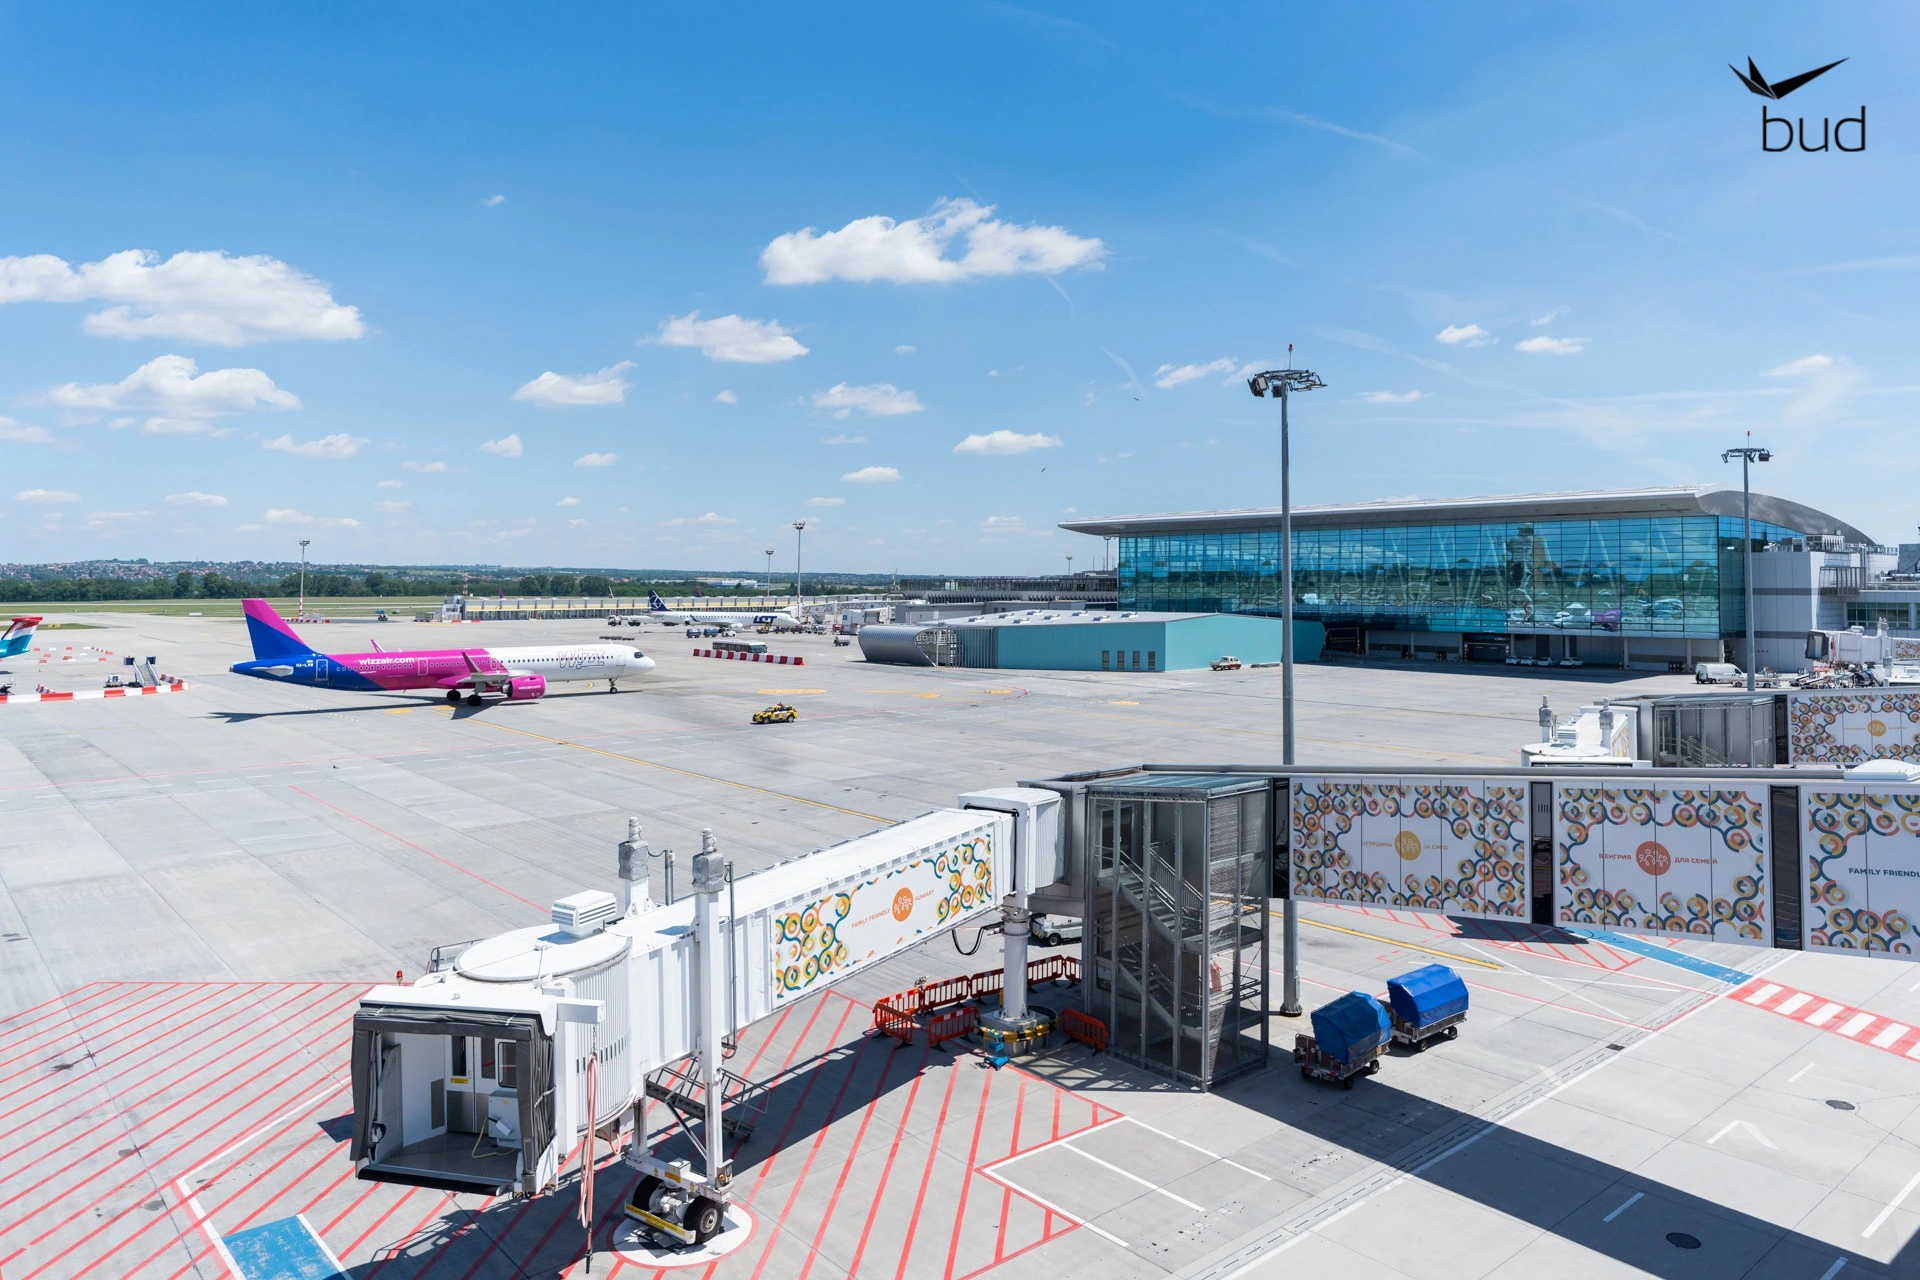 Budapest Airport received an award and a huge fine at the same time